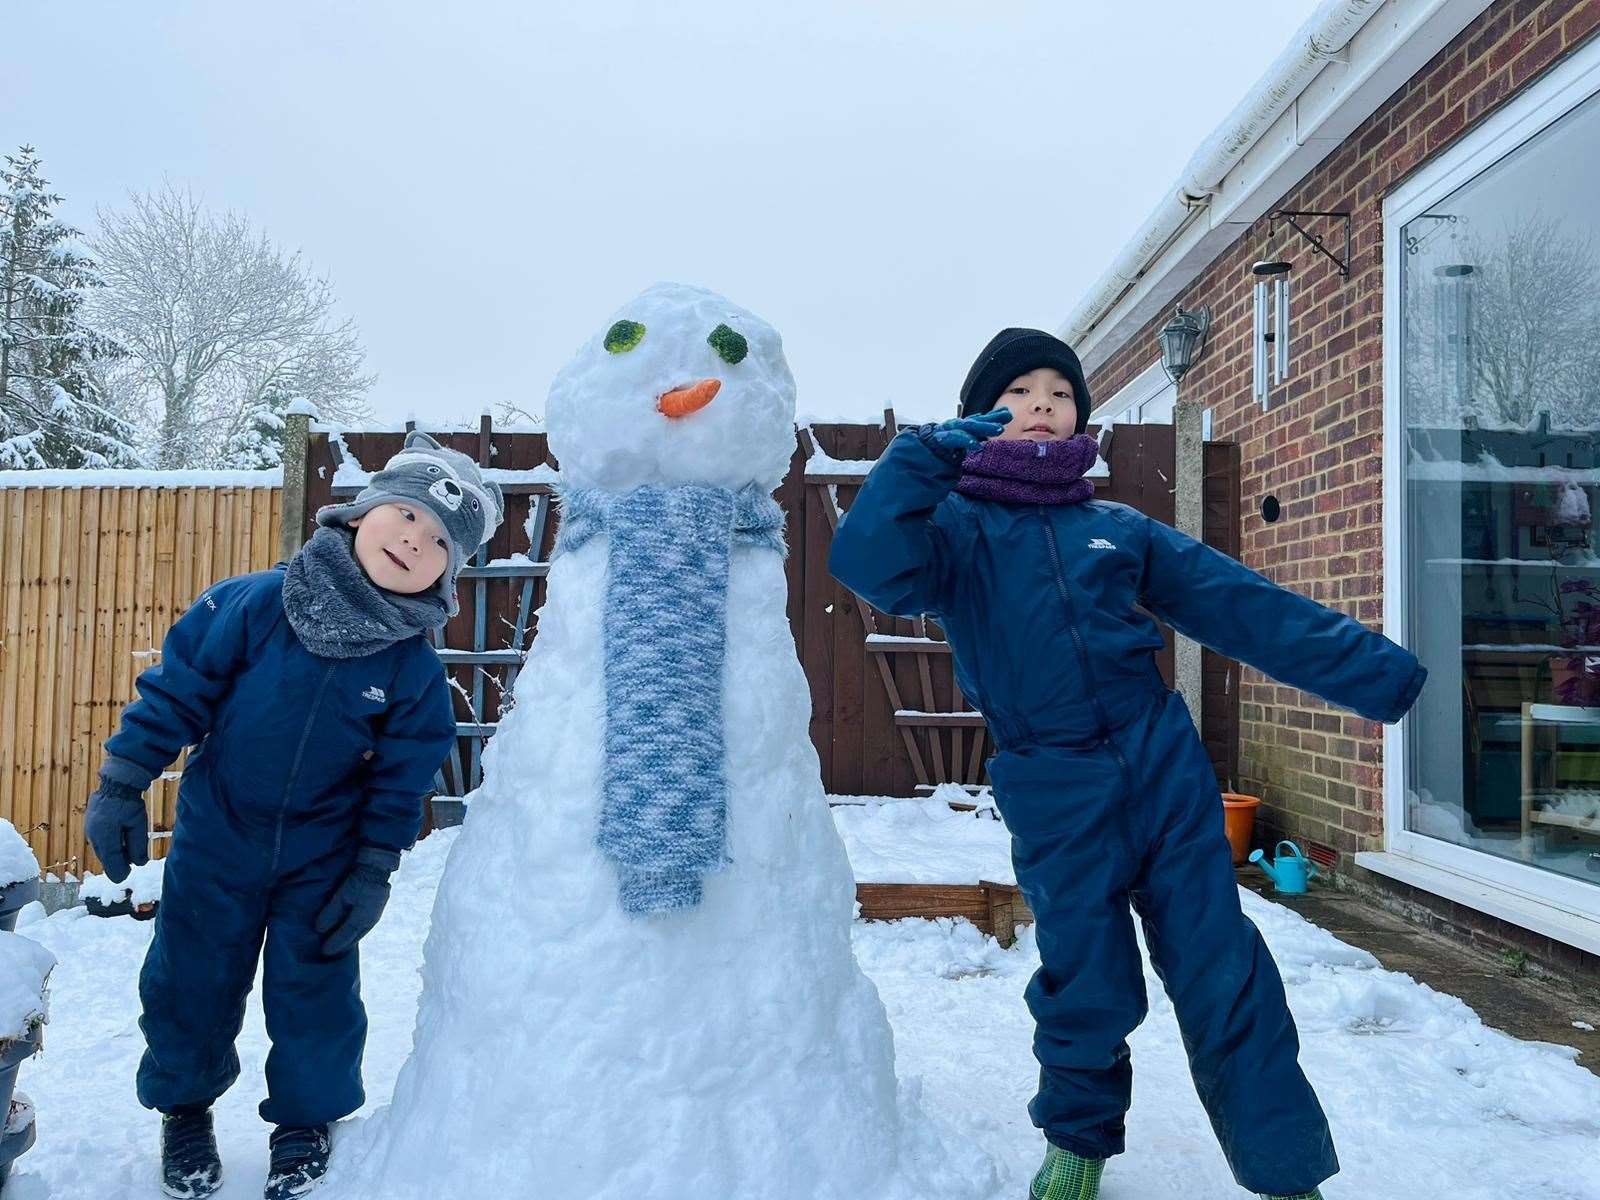 Kyle and Leo enjoy the snow in Gillingham